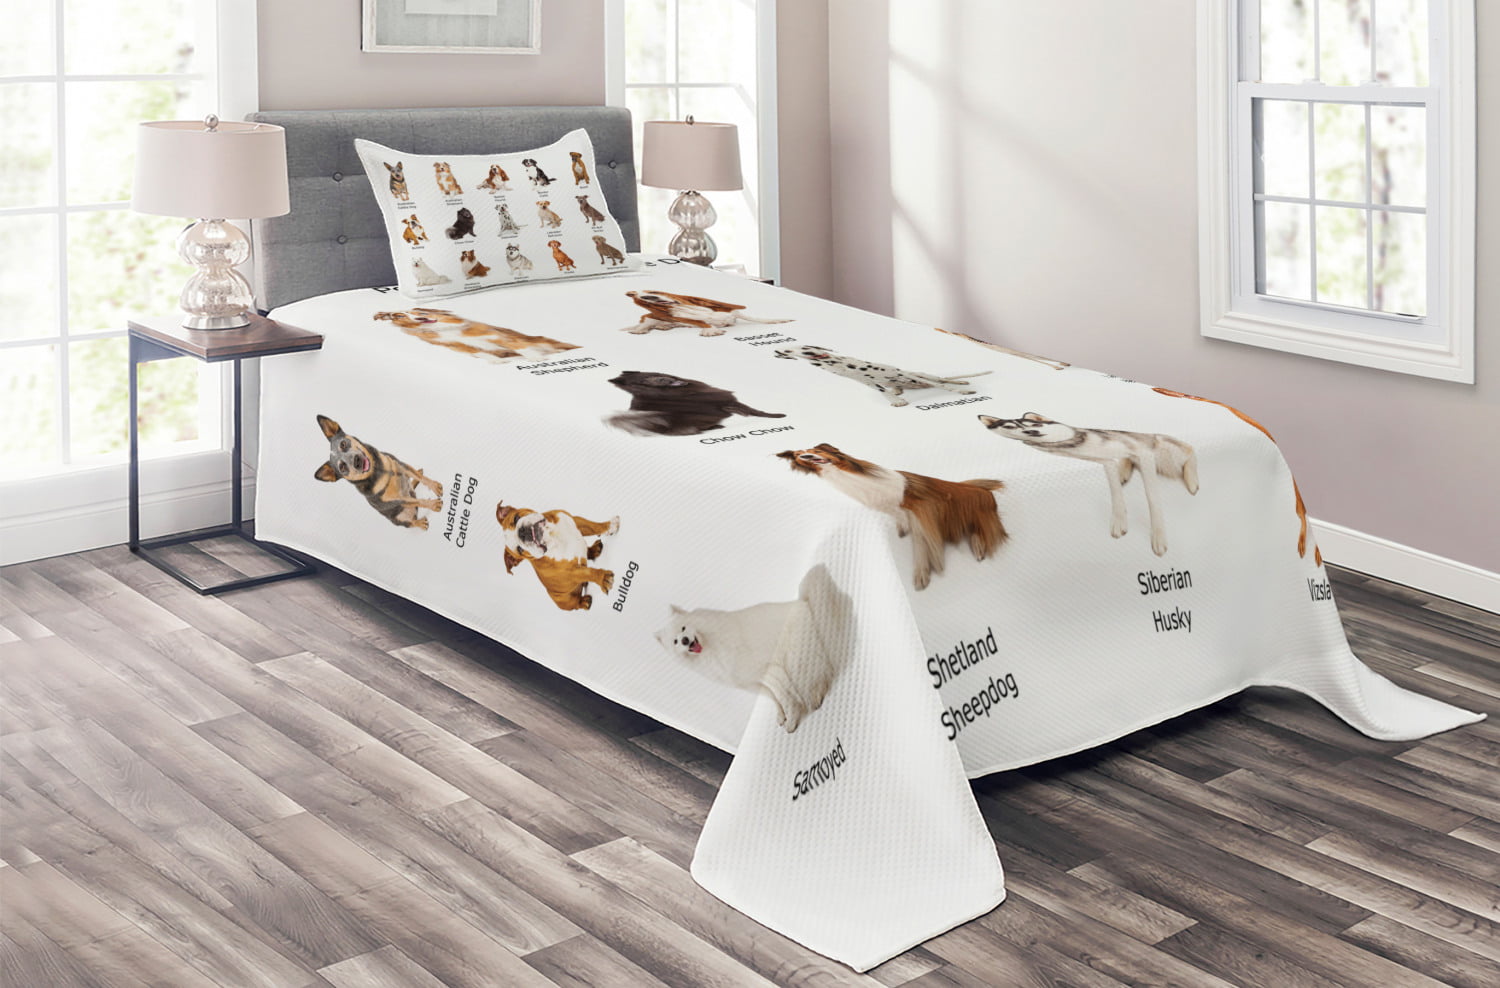 Details about   Dachshund Quilted Bedspread & Pillow Shams Set Colorful Dog Design Print 